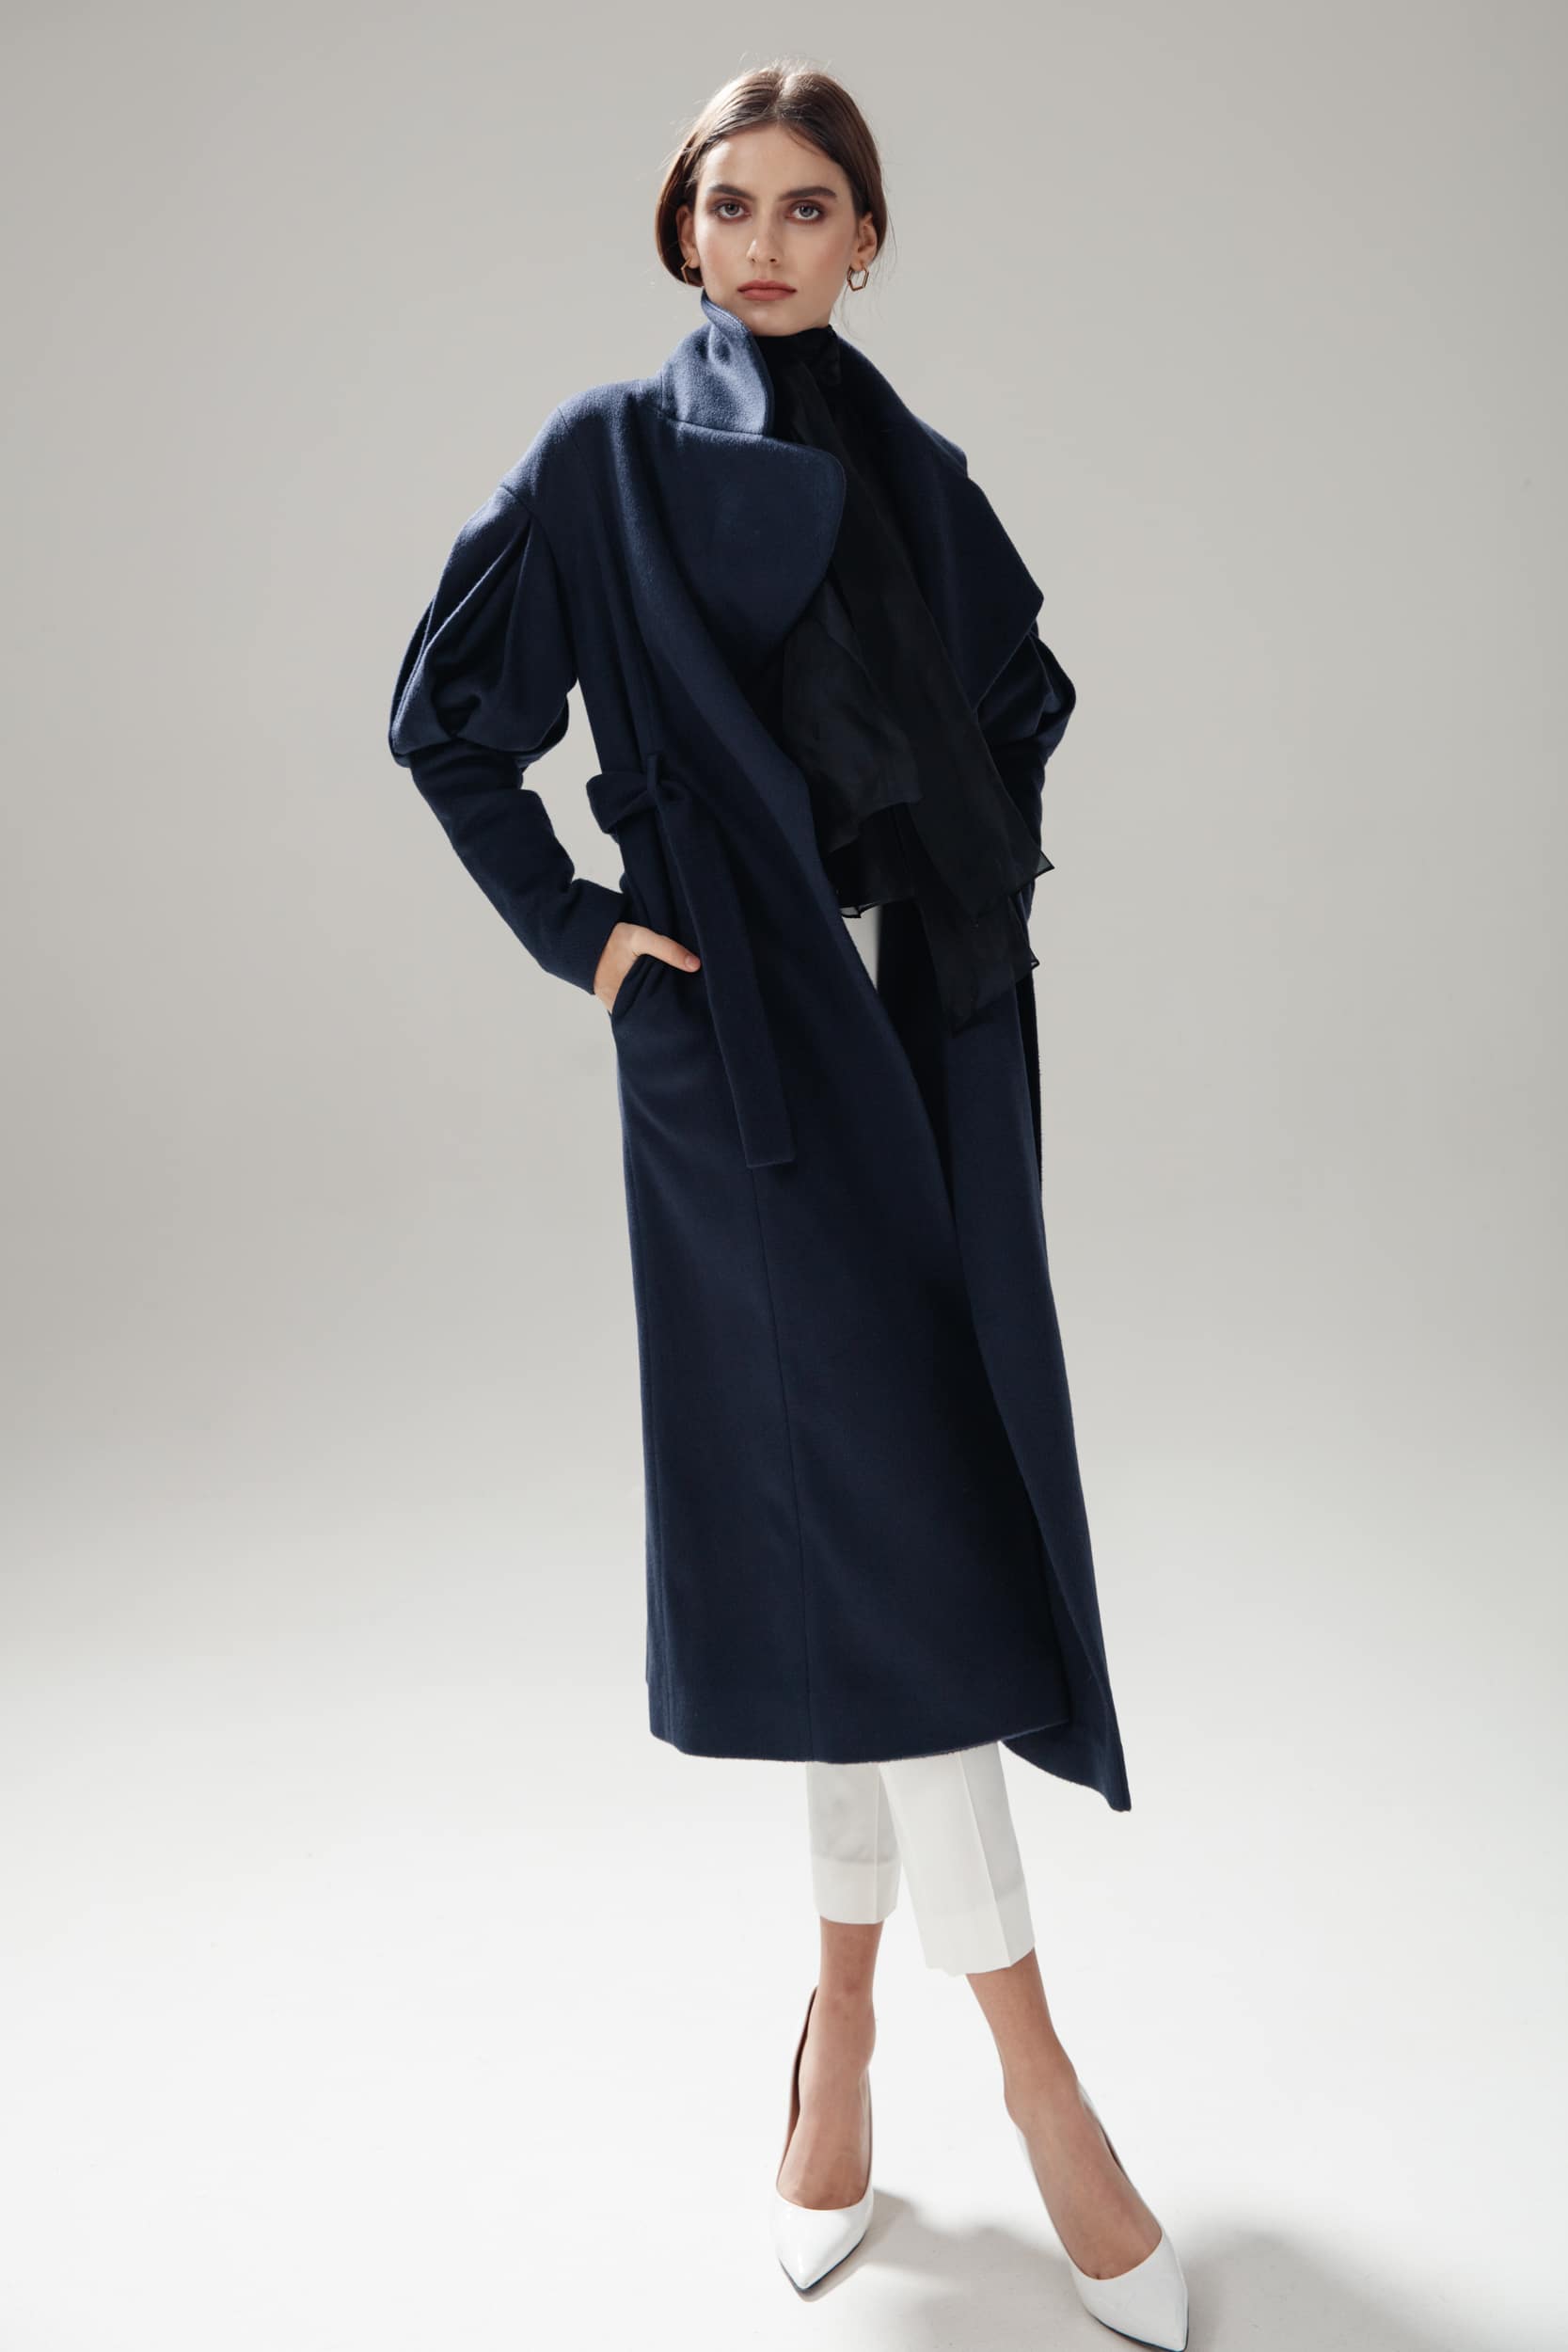 Statement Trench Coat in Navy Blue